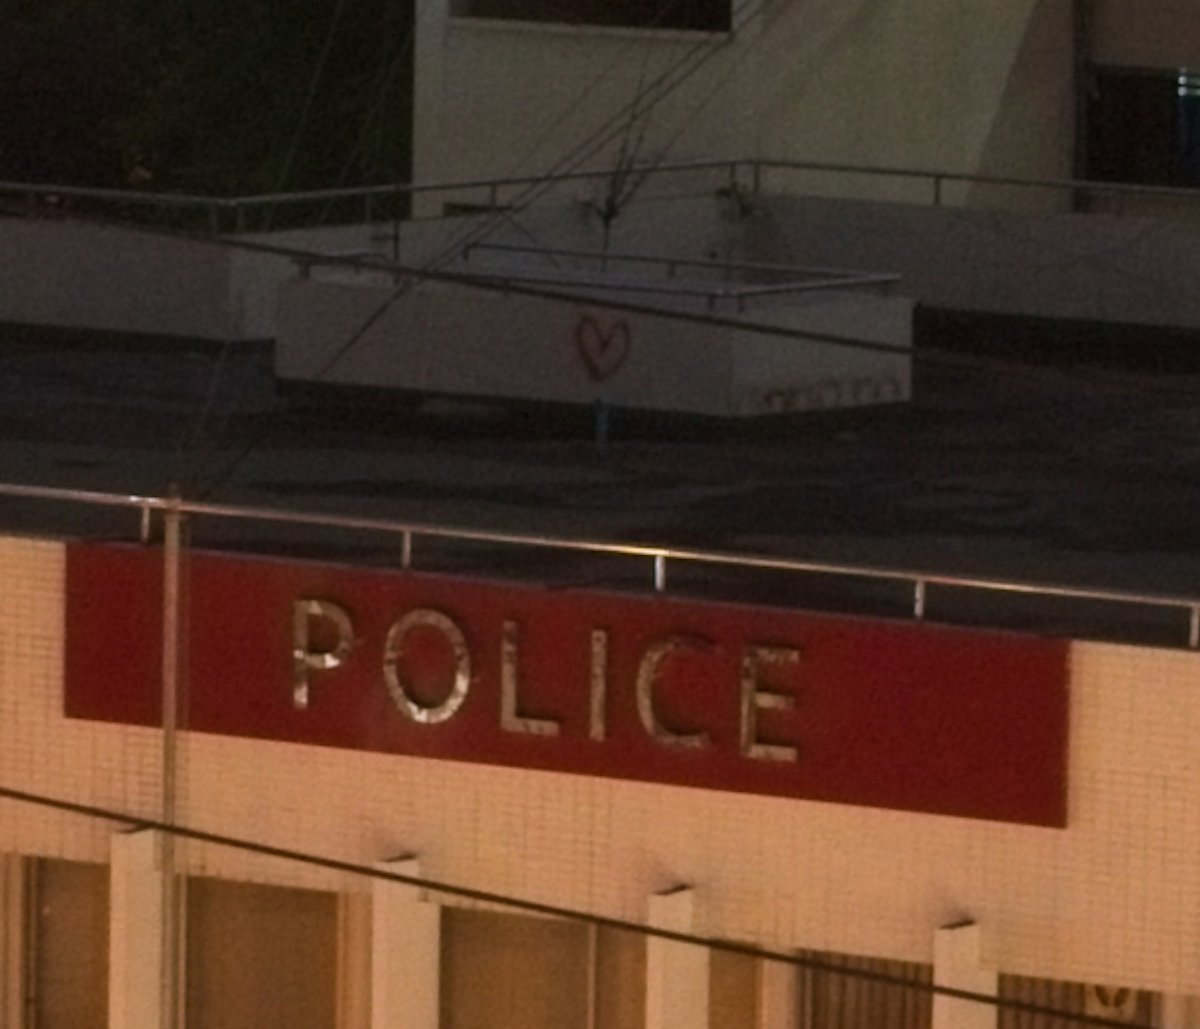 Unedited ON1 RAW image of rooftop with a police sign